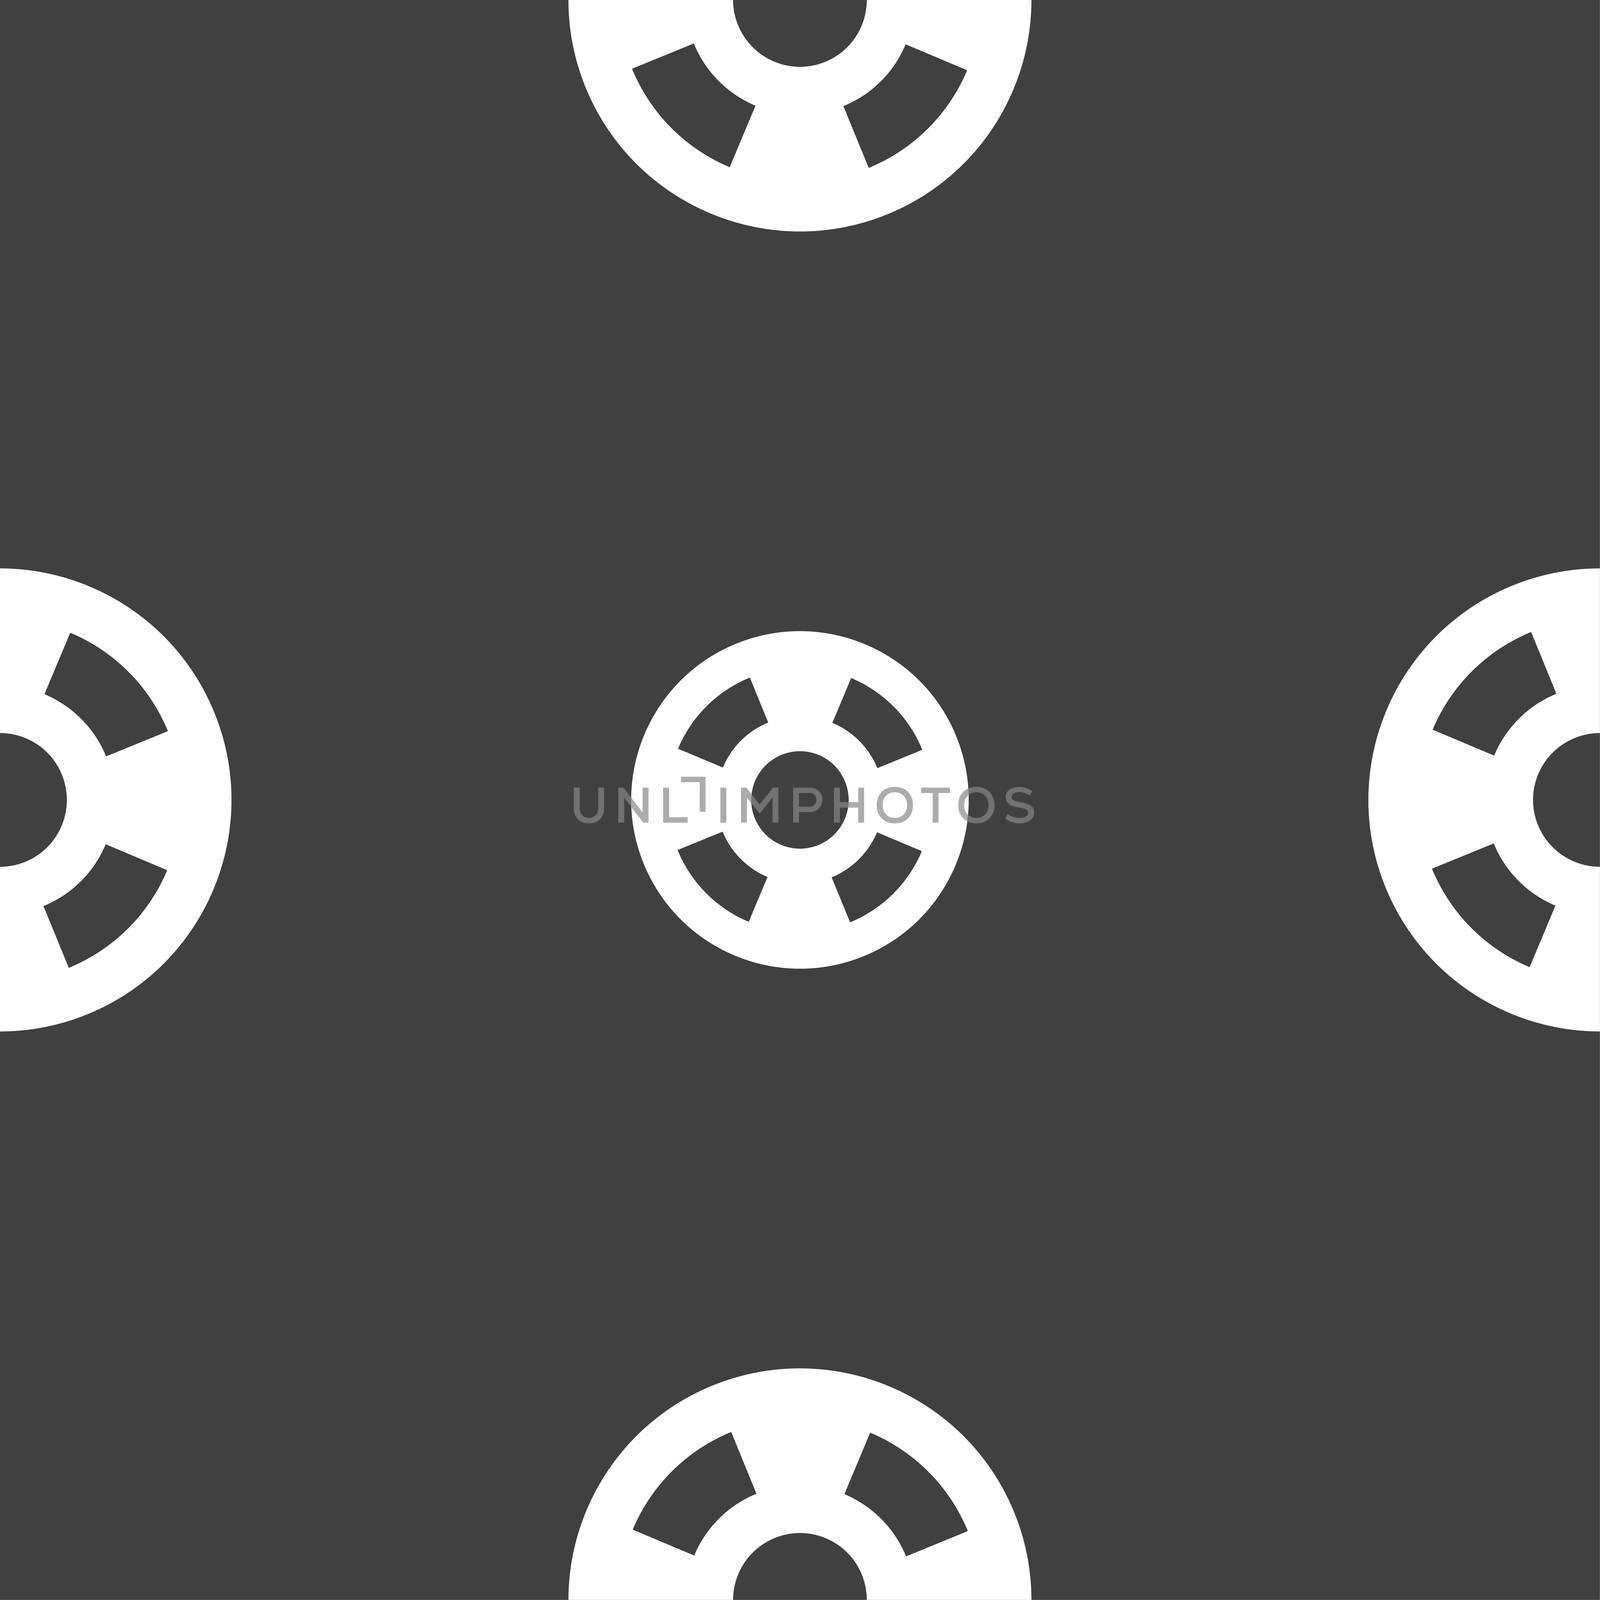 film icon sign. Seamless pattern on a gray background. illustration